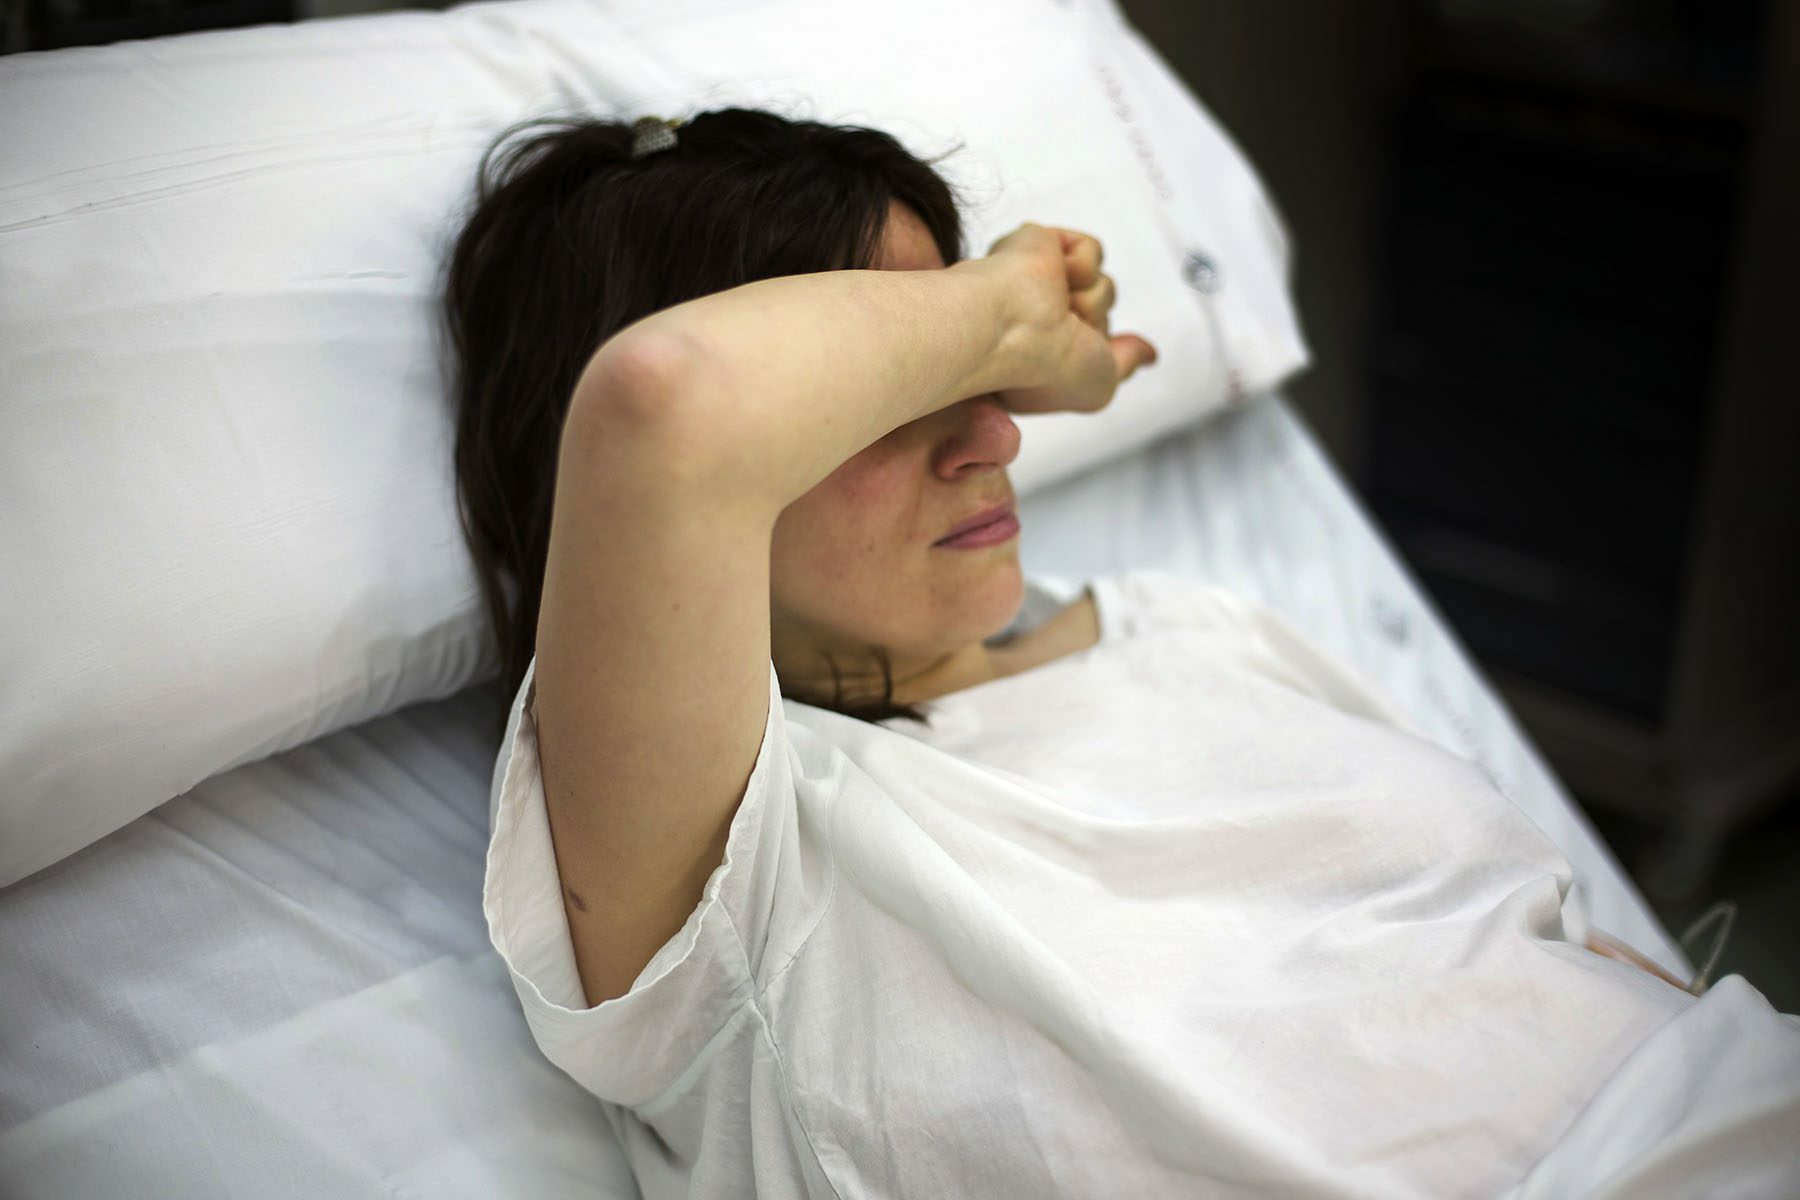 A pregnant woman covers her face while lying in a hospital bed.